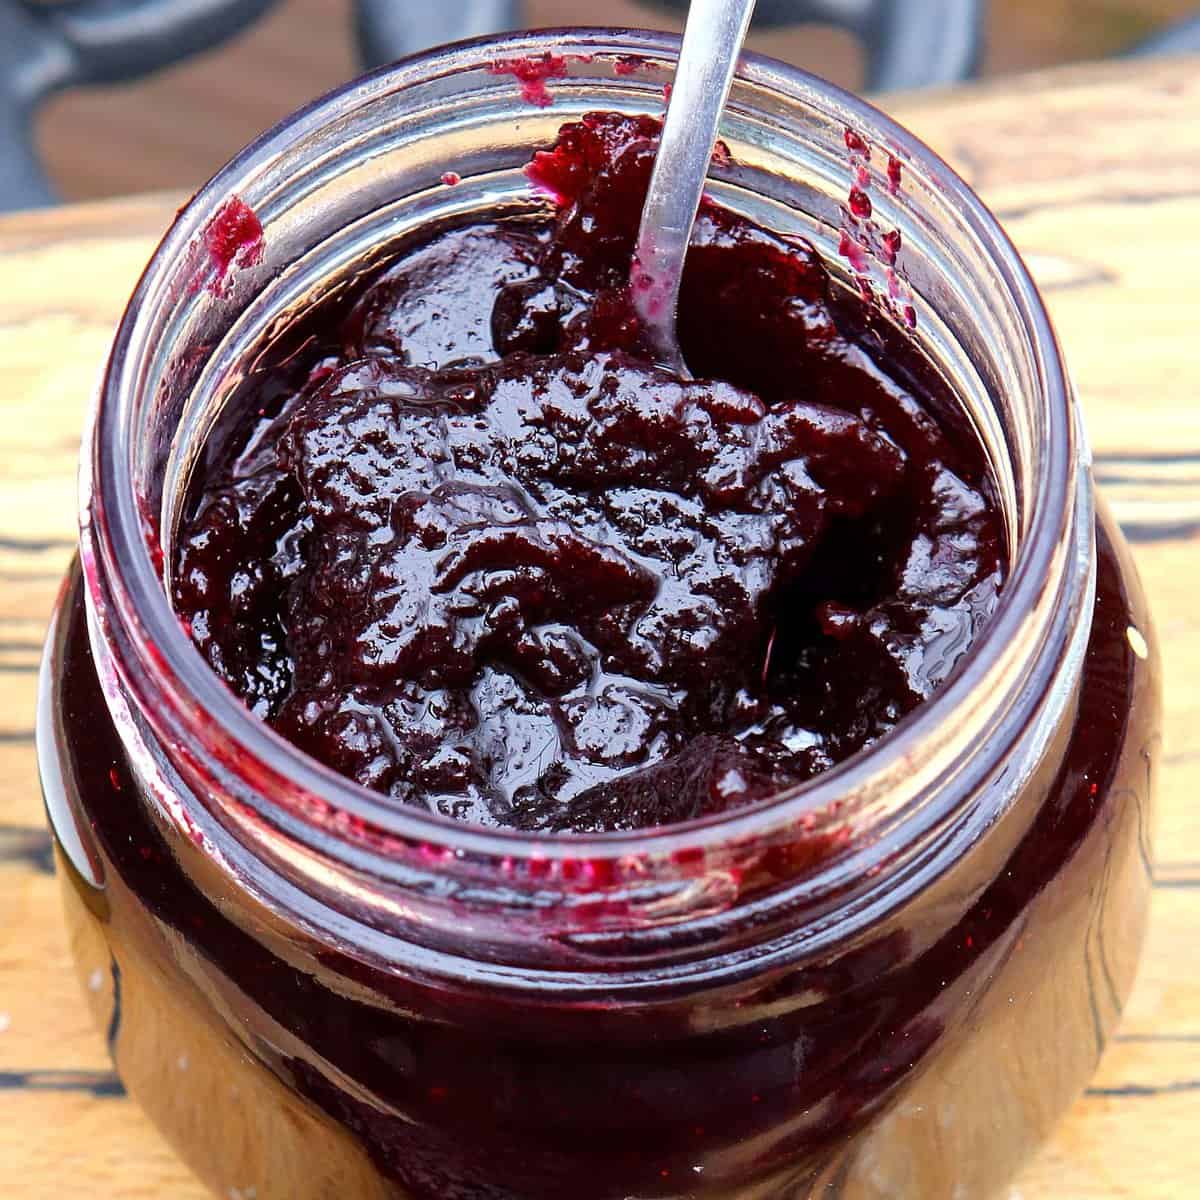  Nothing beats the taste of homemade jam, especially when it's made with fresh, seasonal berries.